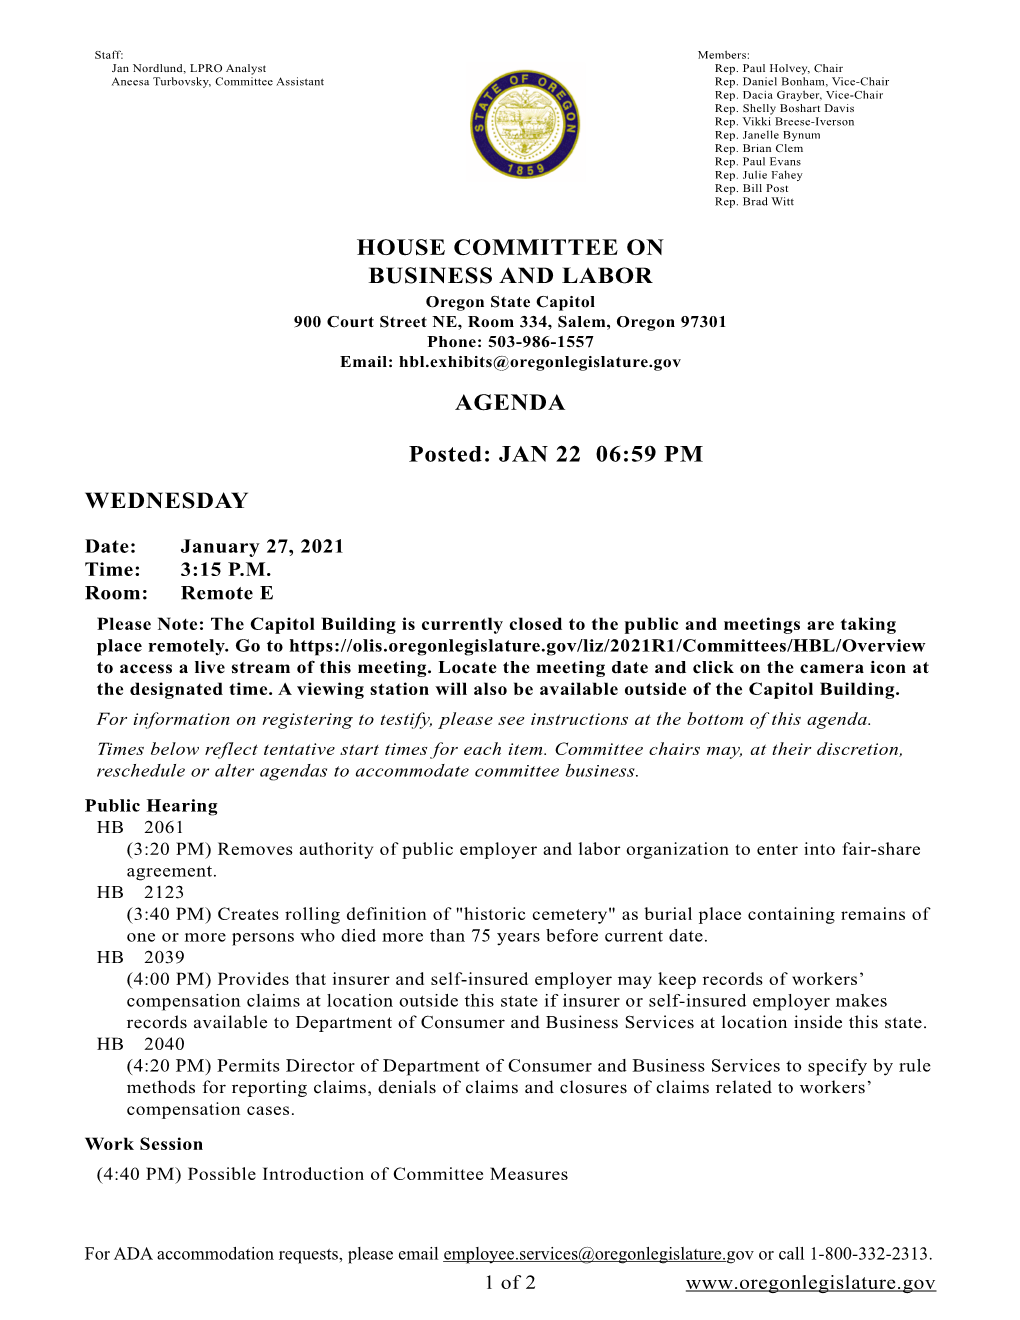 HOUSE COMMITTEE on BUSINESS and LABOR AGENDA Posted: JAN